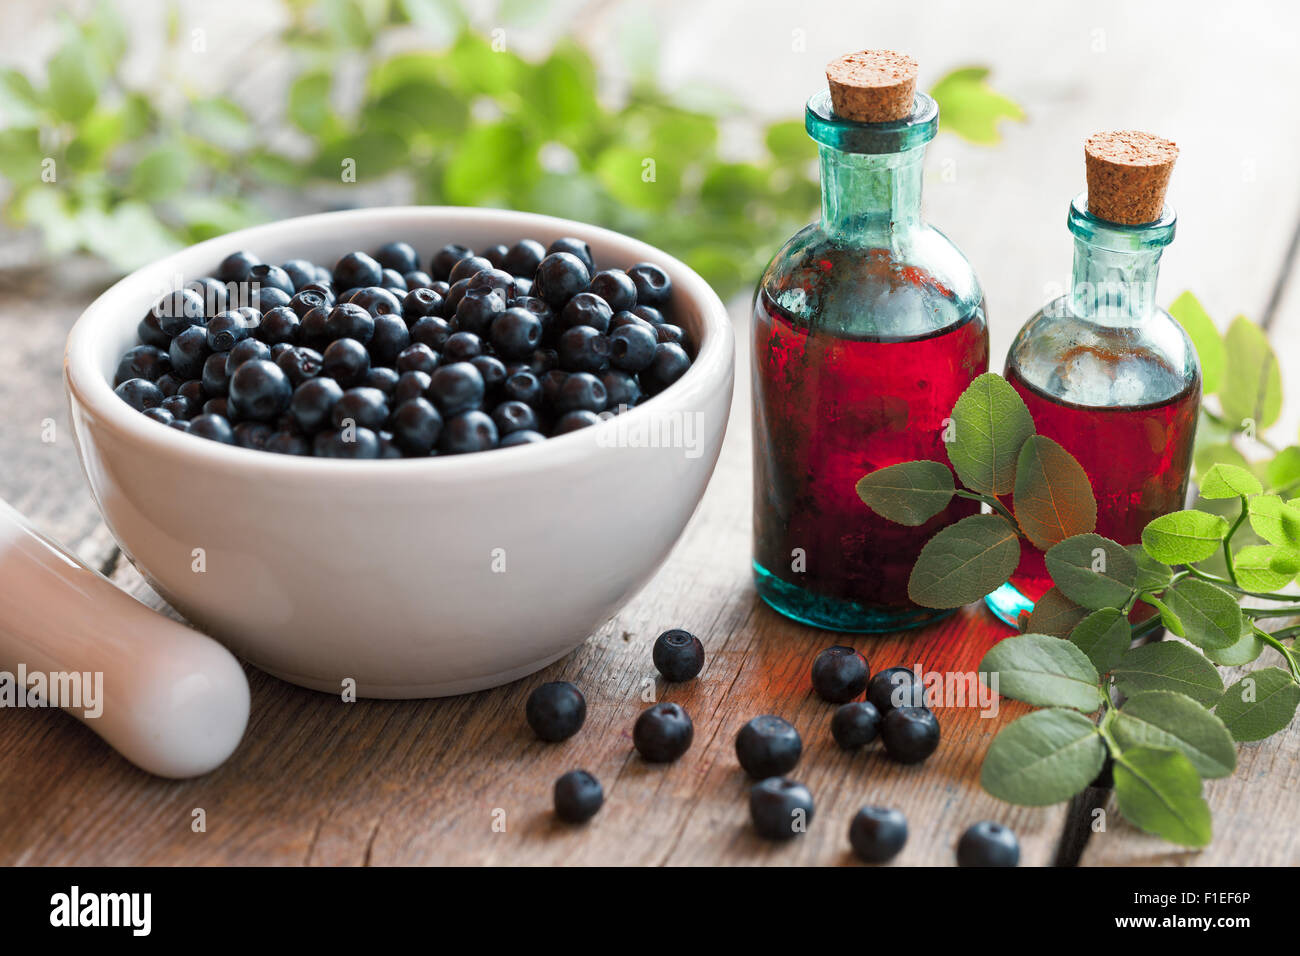 Mortar with blueberries and small bottles of tincture or cosmetic product. Selective focus. Stock Photo